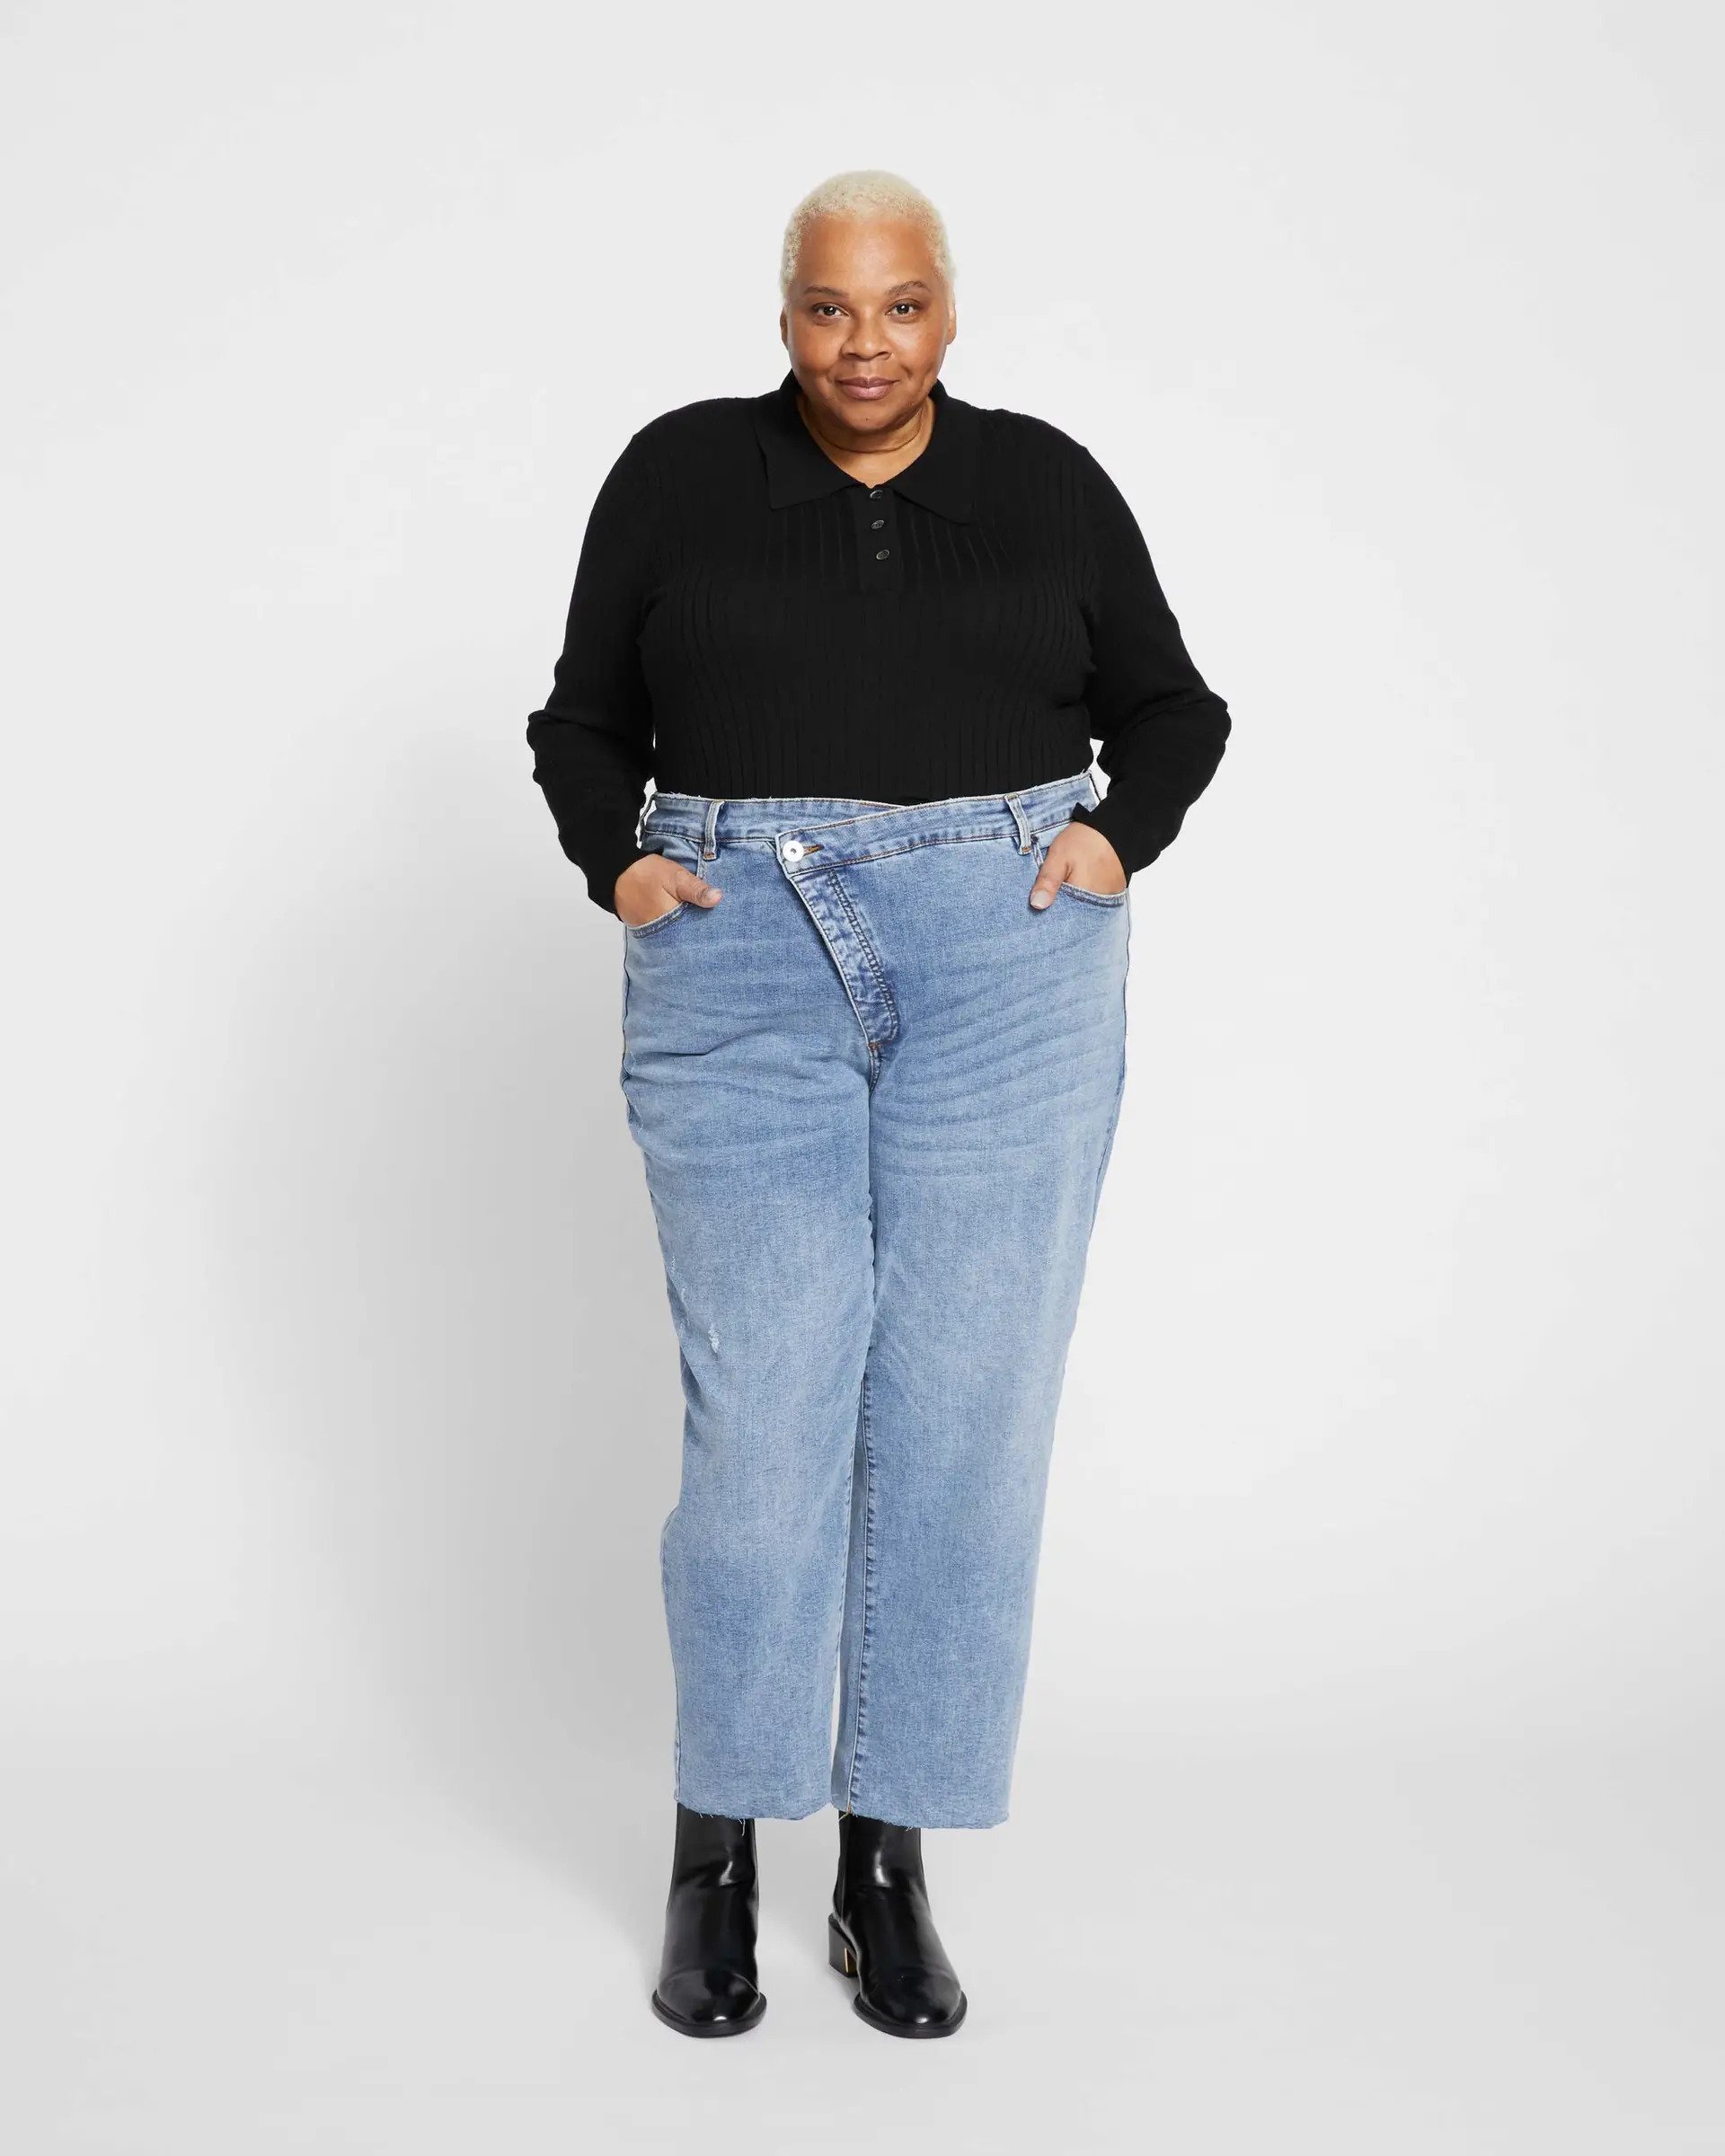 13 Best Jeans for Thick Thighs